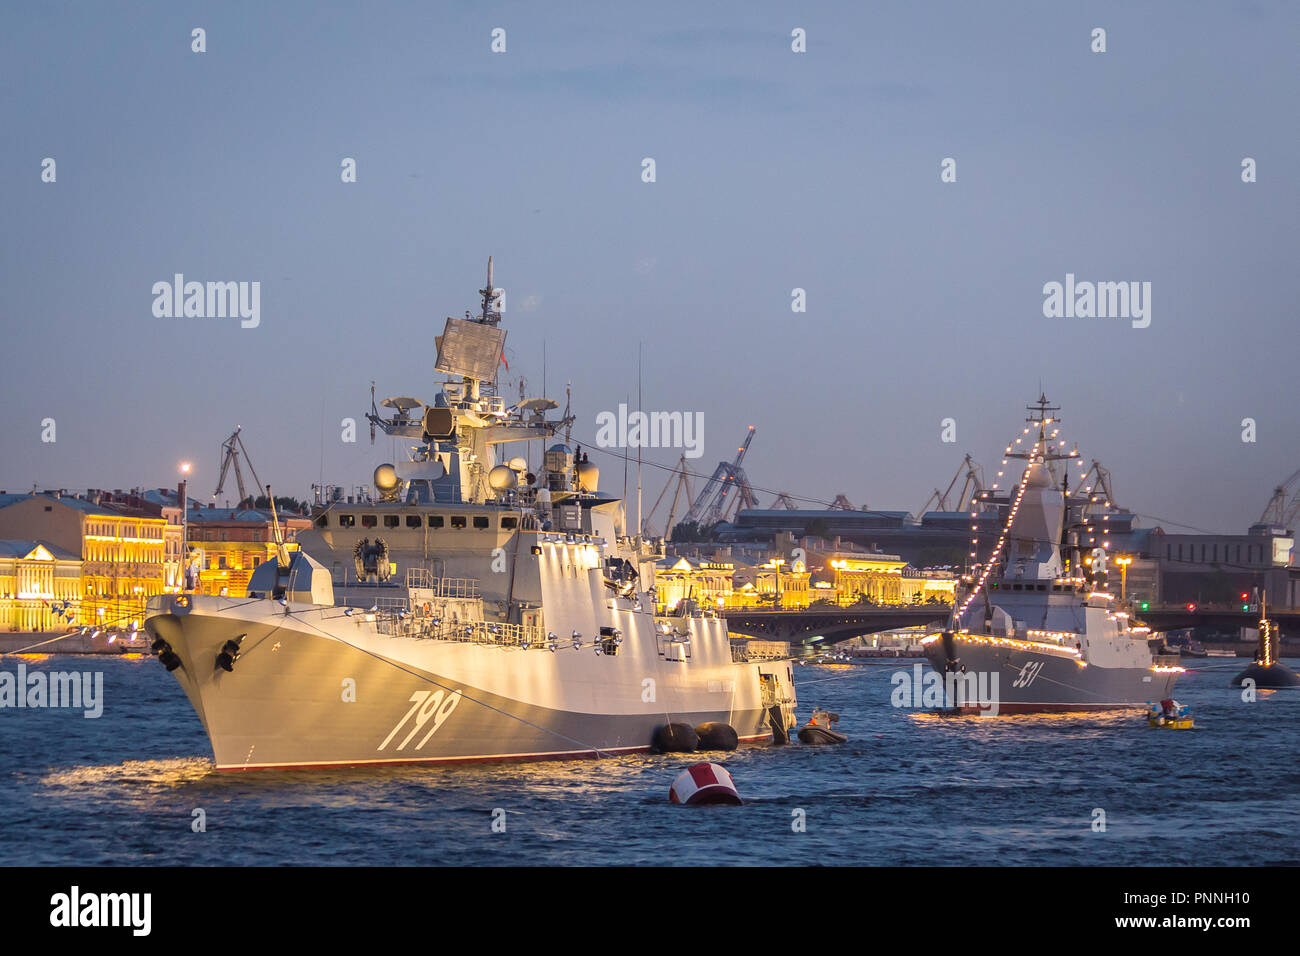 SAINT-PETERSBURG, RUSSIA, July 24, 2018: navy ships moored on Neva river in preparation for a parade Stock Photo